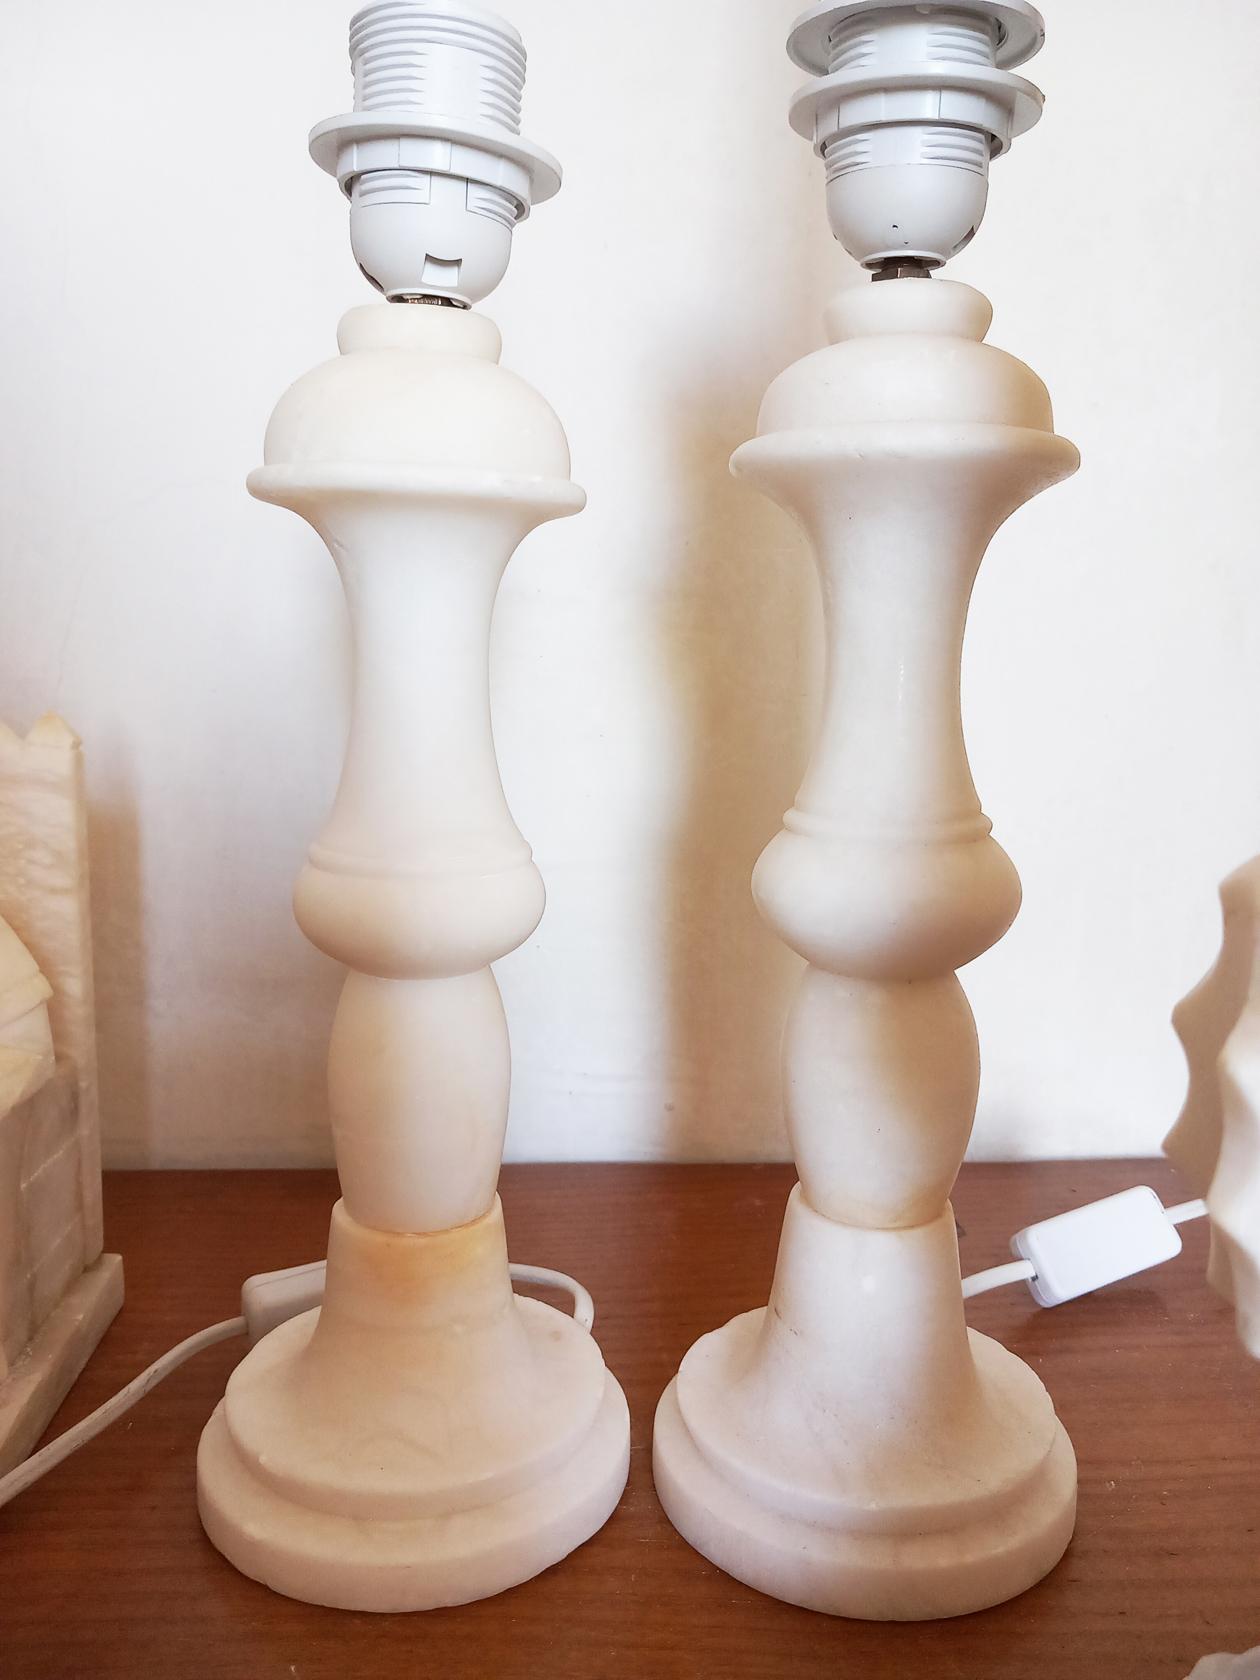 Table lamps in white alabaster.,It is in very good condition. Newer Used

It is suitable to put on a side table in the living room or on a bedside table.

They are almost the same but not exact. One is a little taller than the other. These pretty